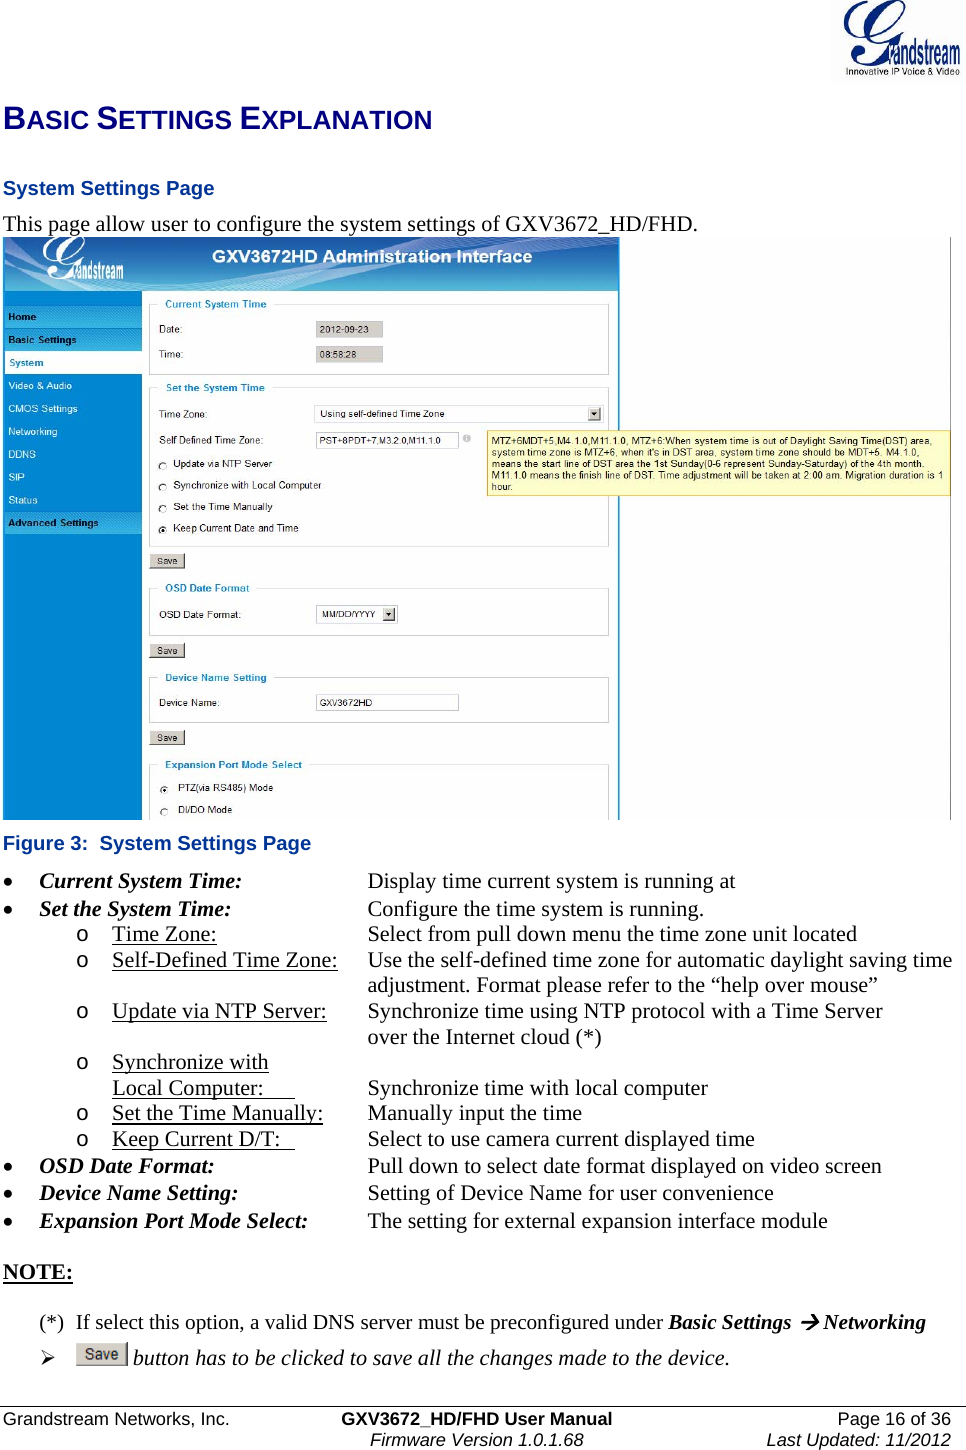  Grandstream Networks, Inc.  GXV3672_HD/FHD User Manual  Page 16 of 36    Firmware Version 1.0.1.68  Last Updated: 11/2012  BASIC SETTINGS EXPLANATION  System Settings Page  This page allow user to configure the system settings of GXV3672_HD/FHD.  Figure 3:  System Settings Page • Current System Time:     Display time current system is running at • Set the System Time:     Configure the time system is running.  o Time Zone:     Select from pull down menu the time zone unit located o Self-Defined Time Zone:   Use the self-defined time zone for automatic daylight saving time adjustment. Format please refer to the “help over mouse”  o Update via NTP Server:   Synchronize time using NTP protocol with a Time Server over the Internet cloud (*) o Synchronize with  Local Computer:    Synchronize time with local computer  o Set the Time Manually: Manually input the time o Keep Current D/T:    Select to use camera current displayed time • OSD Date Format:     Pull down to select date format displayed on video screen • Device Name Setting:     Setting of Device Name for user convenience • Expansion Port Mode Select:   The setting for external expansion interface module  NOTE:   (*)  If select this option, a valid DNS server must be preconfigured under Basic Settings Æ Networking ¾  button has to be clicked to save all the changes made to the device.  